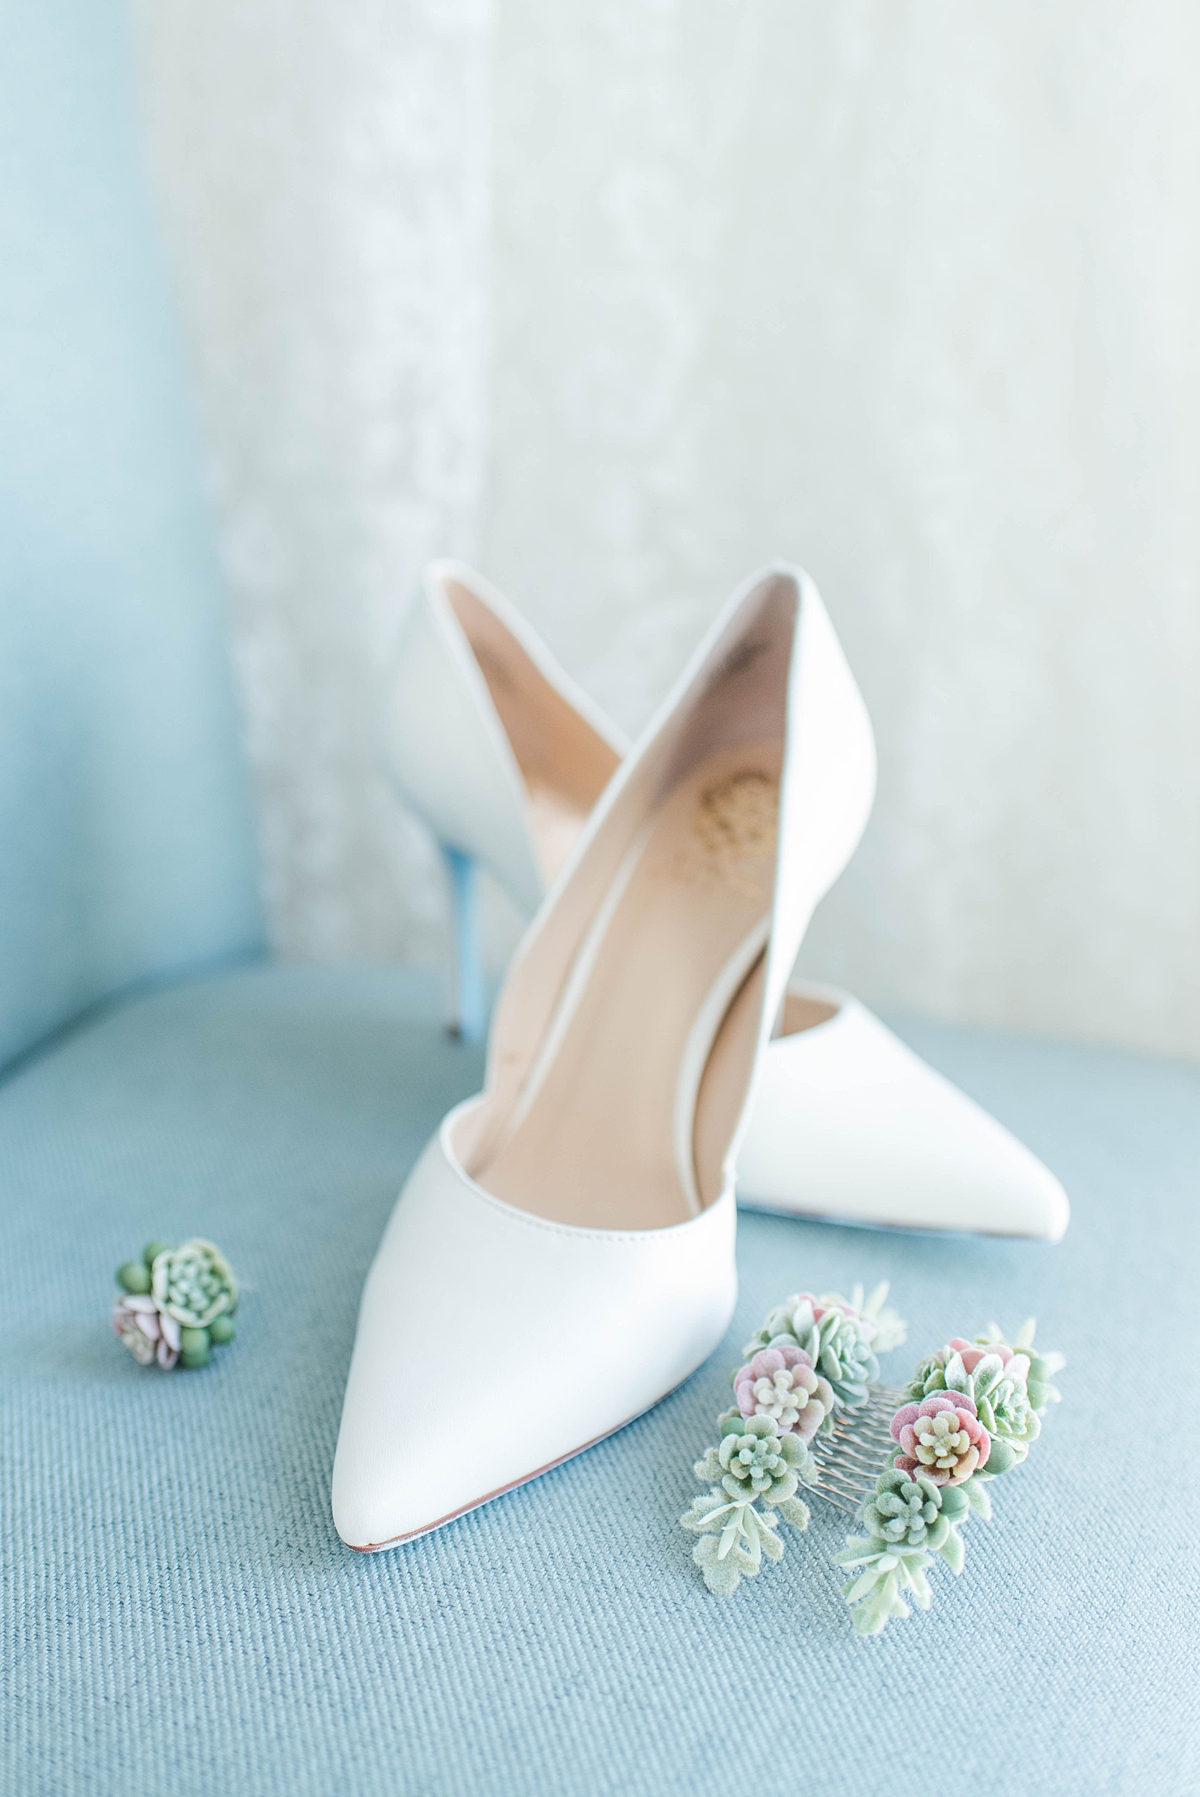 Elegant Wedding Shoes and Details at Virginia Beach Wedding. Wedding Photography by Kailey Brianne Photography, a Virginia Beach Wedding Photographer. 